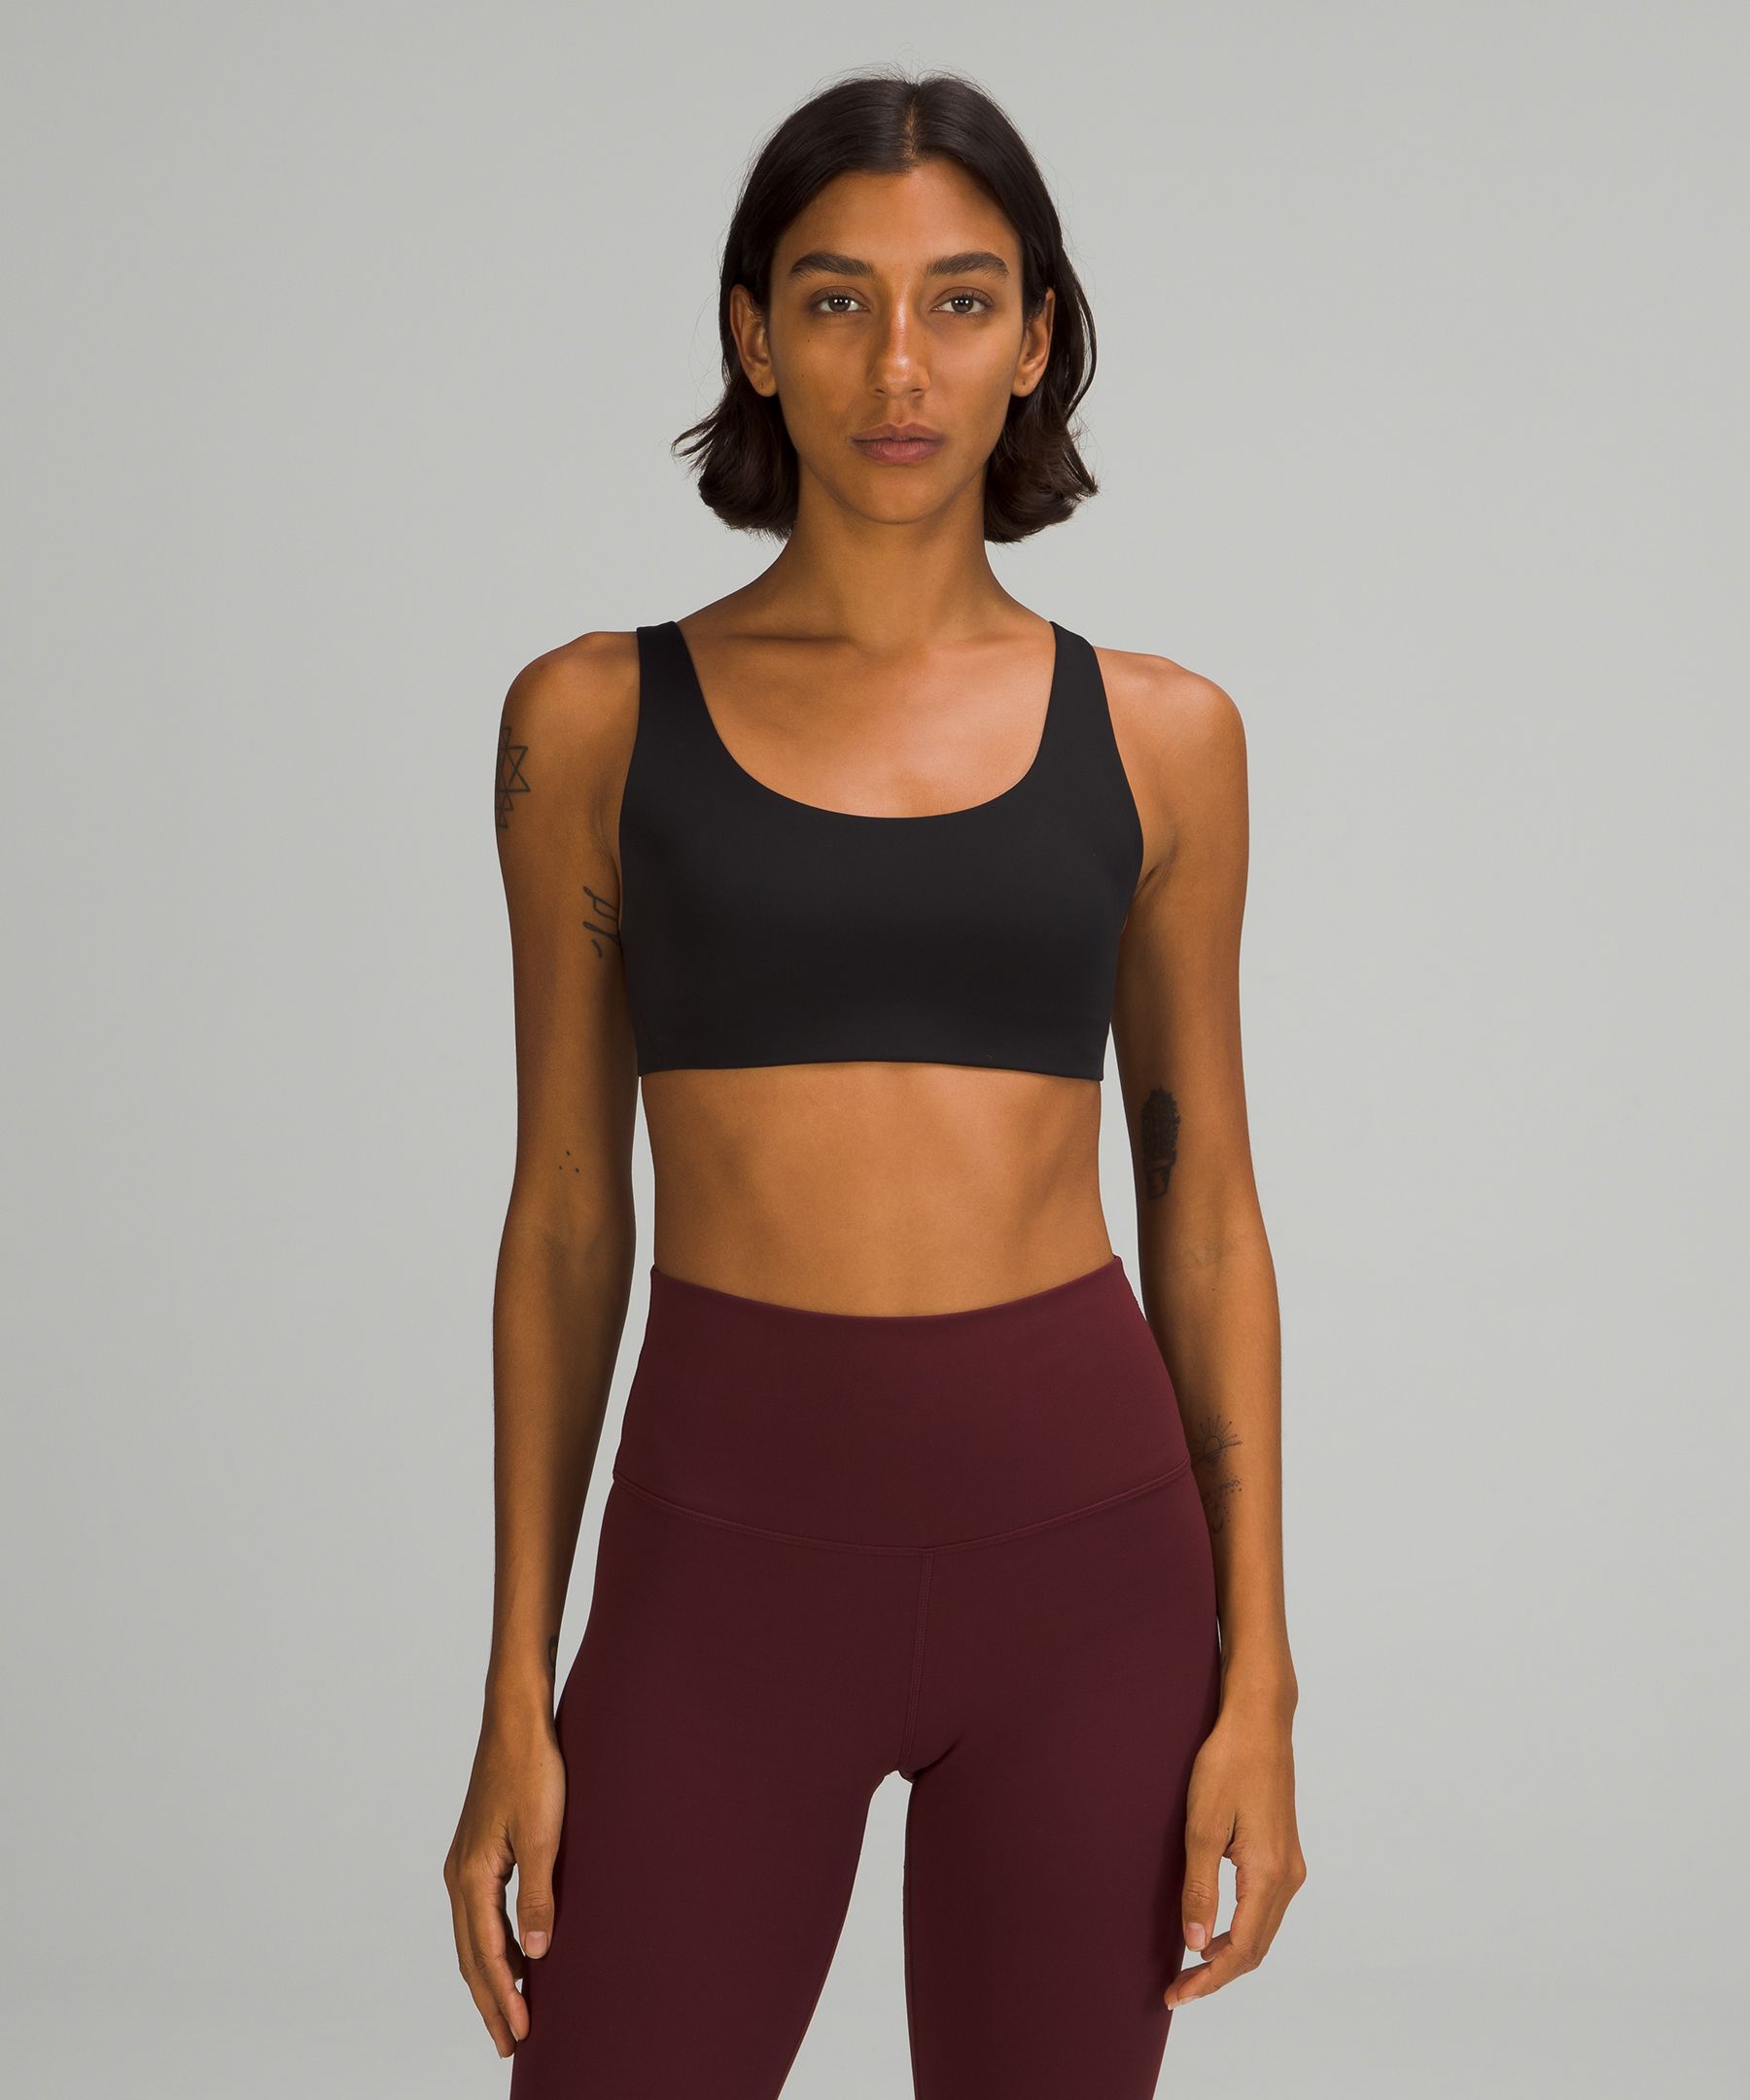 Fit Review! In Alignment Straight Strap Bra & Athleta Girl All